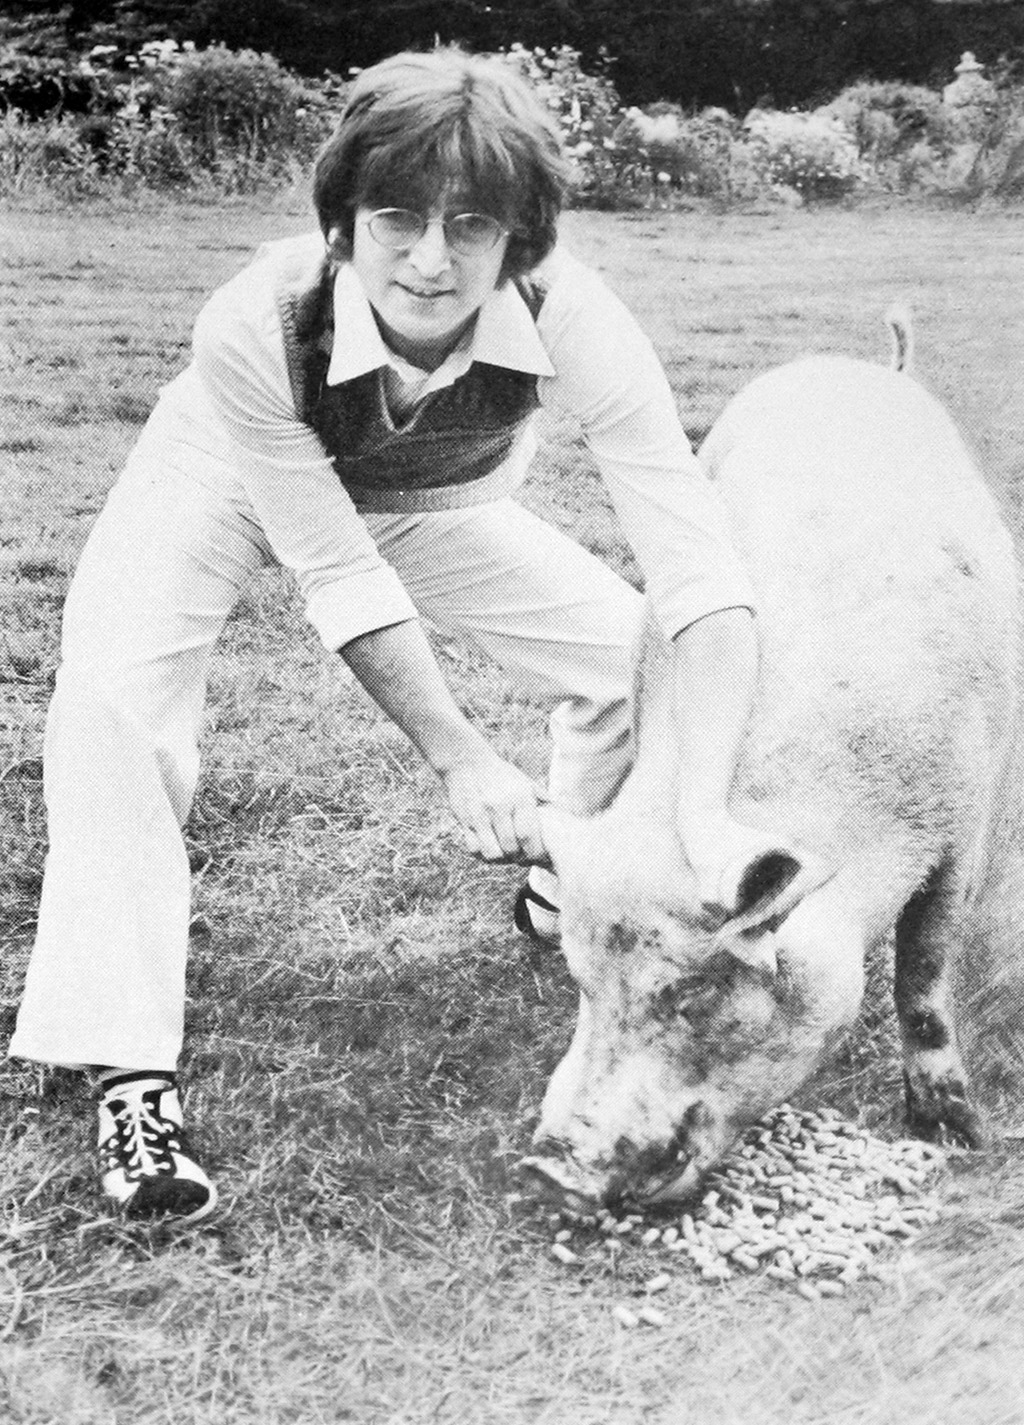 Photo of John Lennon holding a pig by it's ears